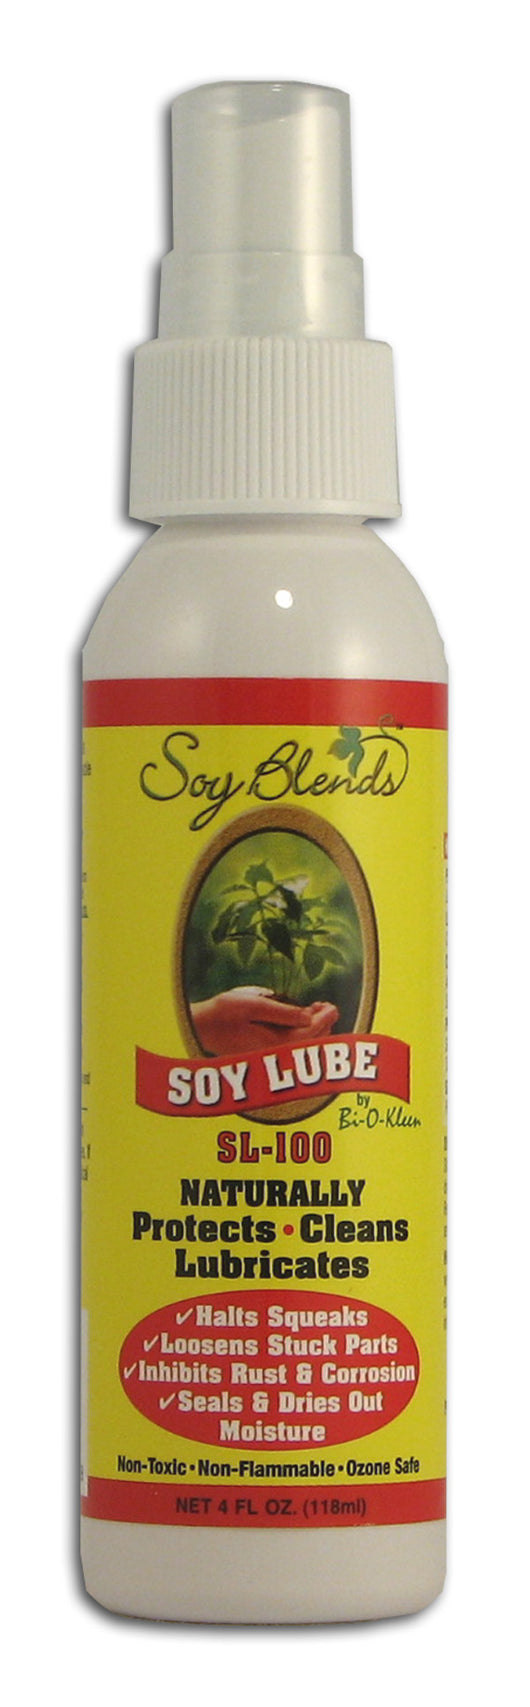 Soy Lube